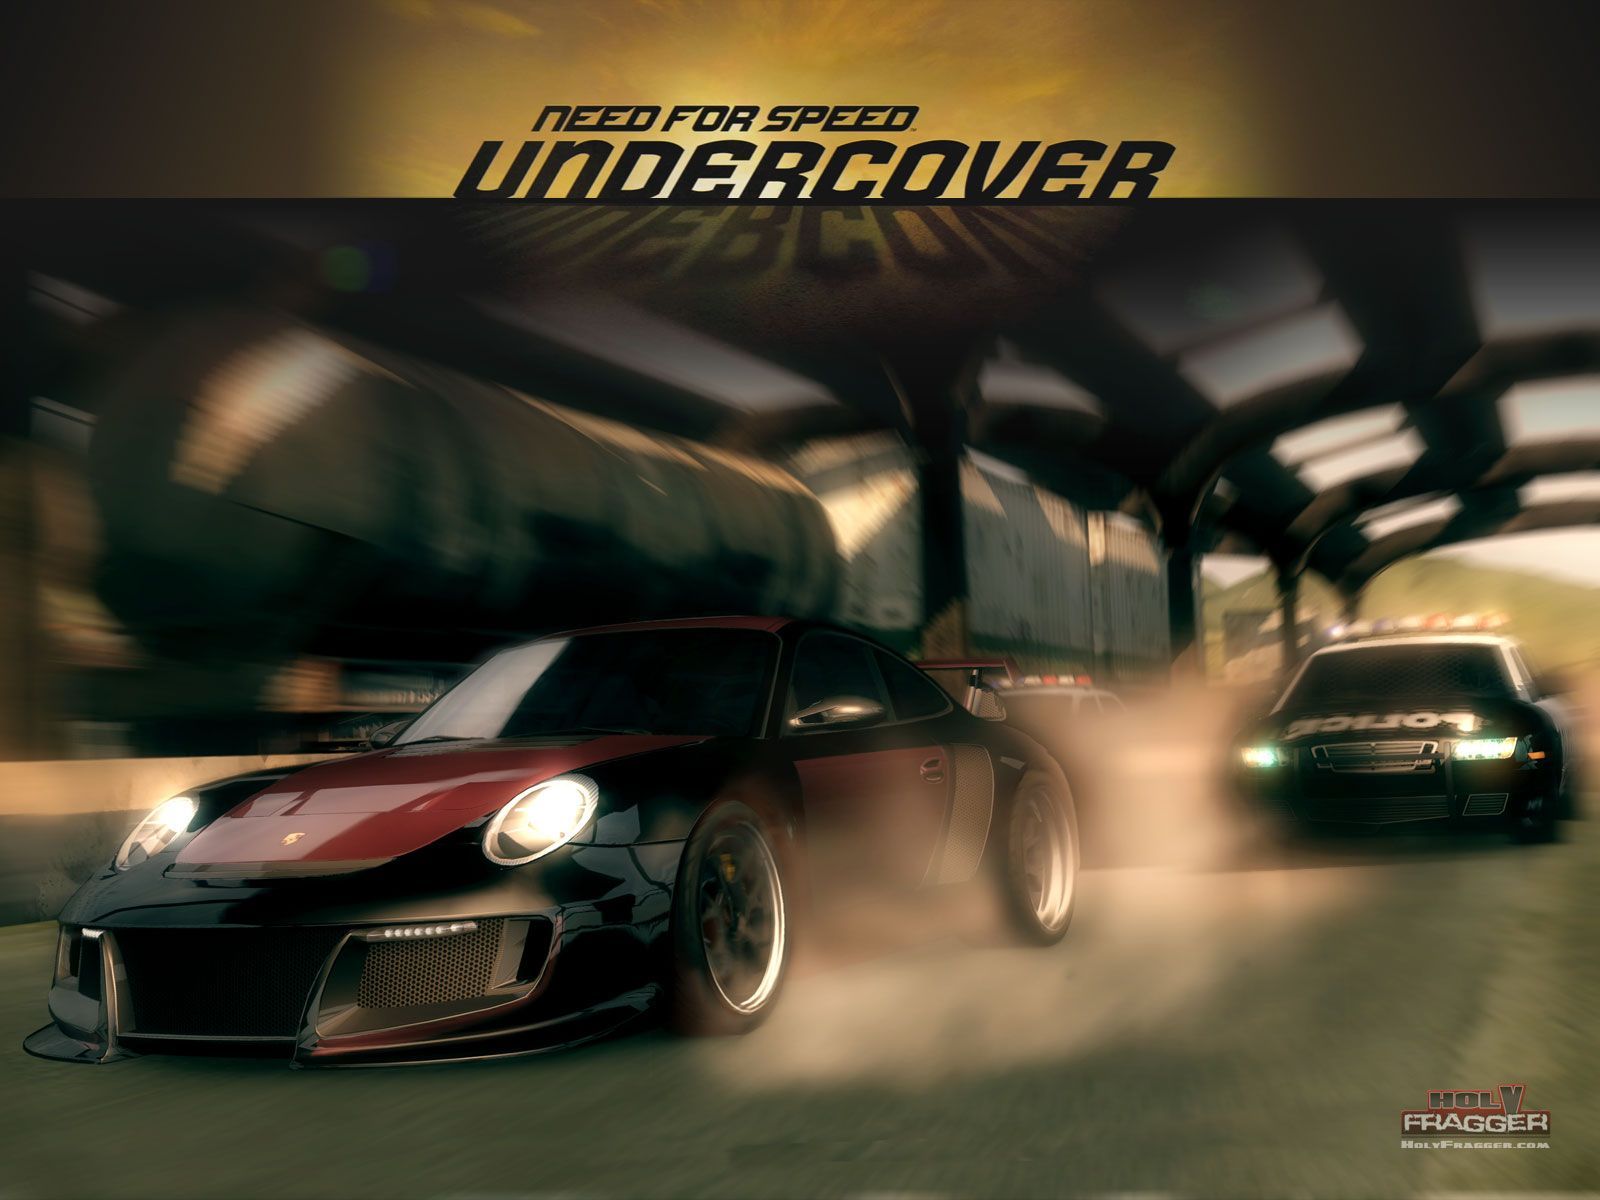 HolyFragger.com Need for Speed Undercover Wallpaper. Need for speed undercover, Need for speed, Photo to video